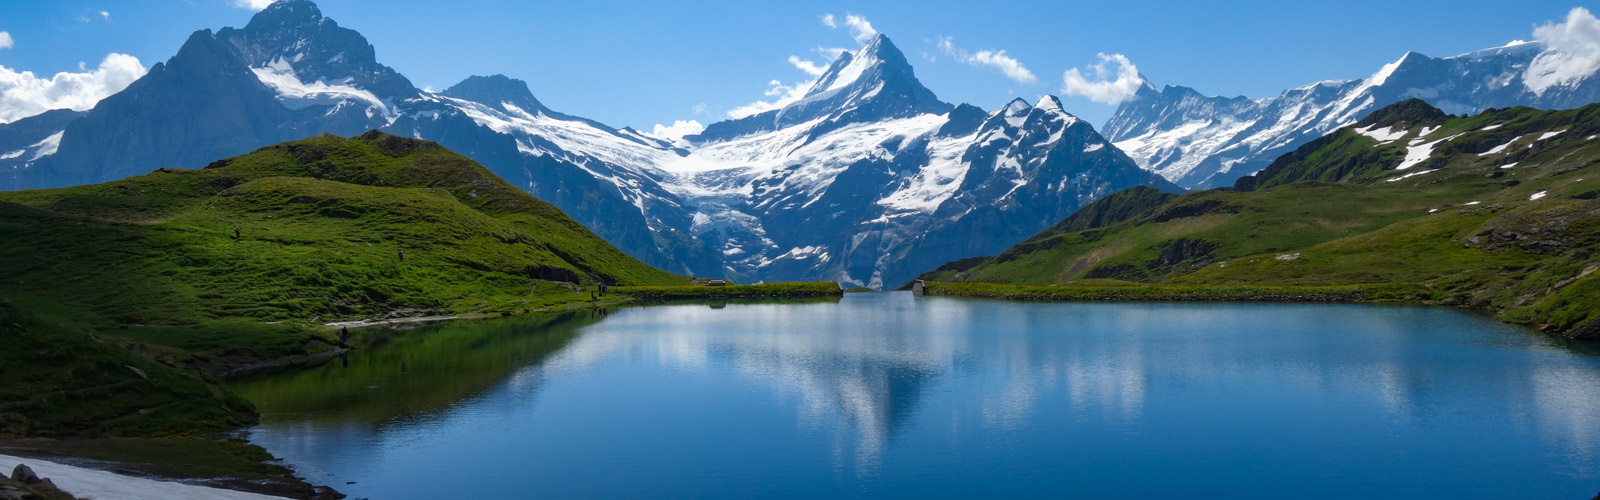 Ultimate Guide to the Jungfrau Region of Switzerland: My Favorite Place on ...